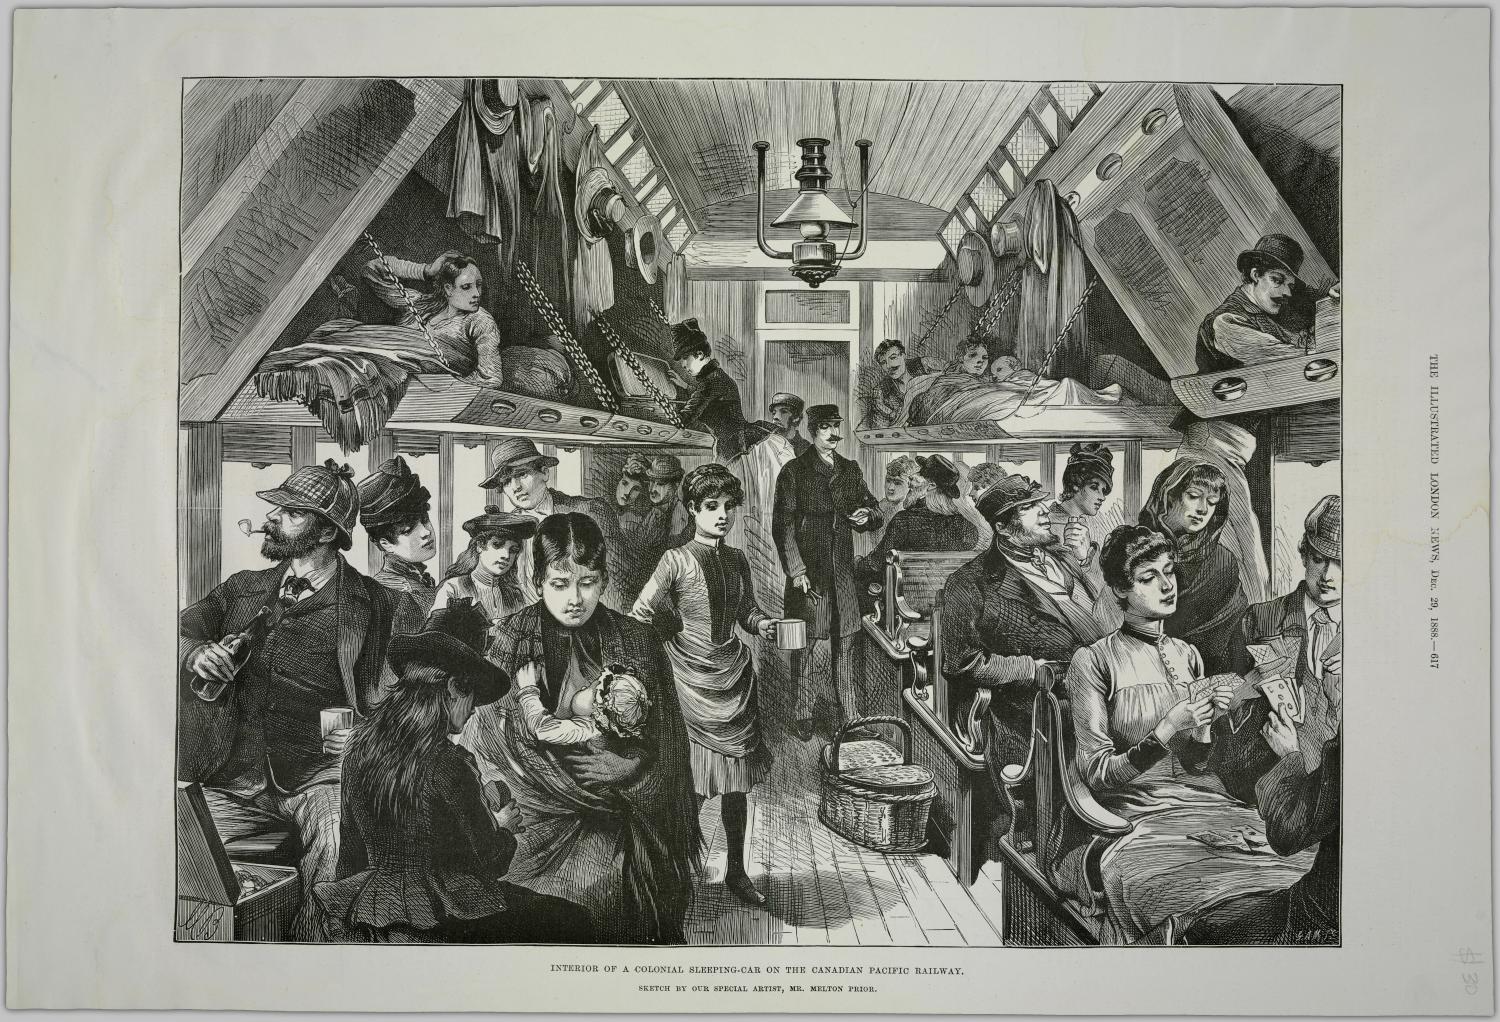 Interior of train car of white immigrants on a Canadian Pacific Railway